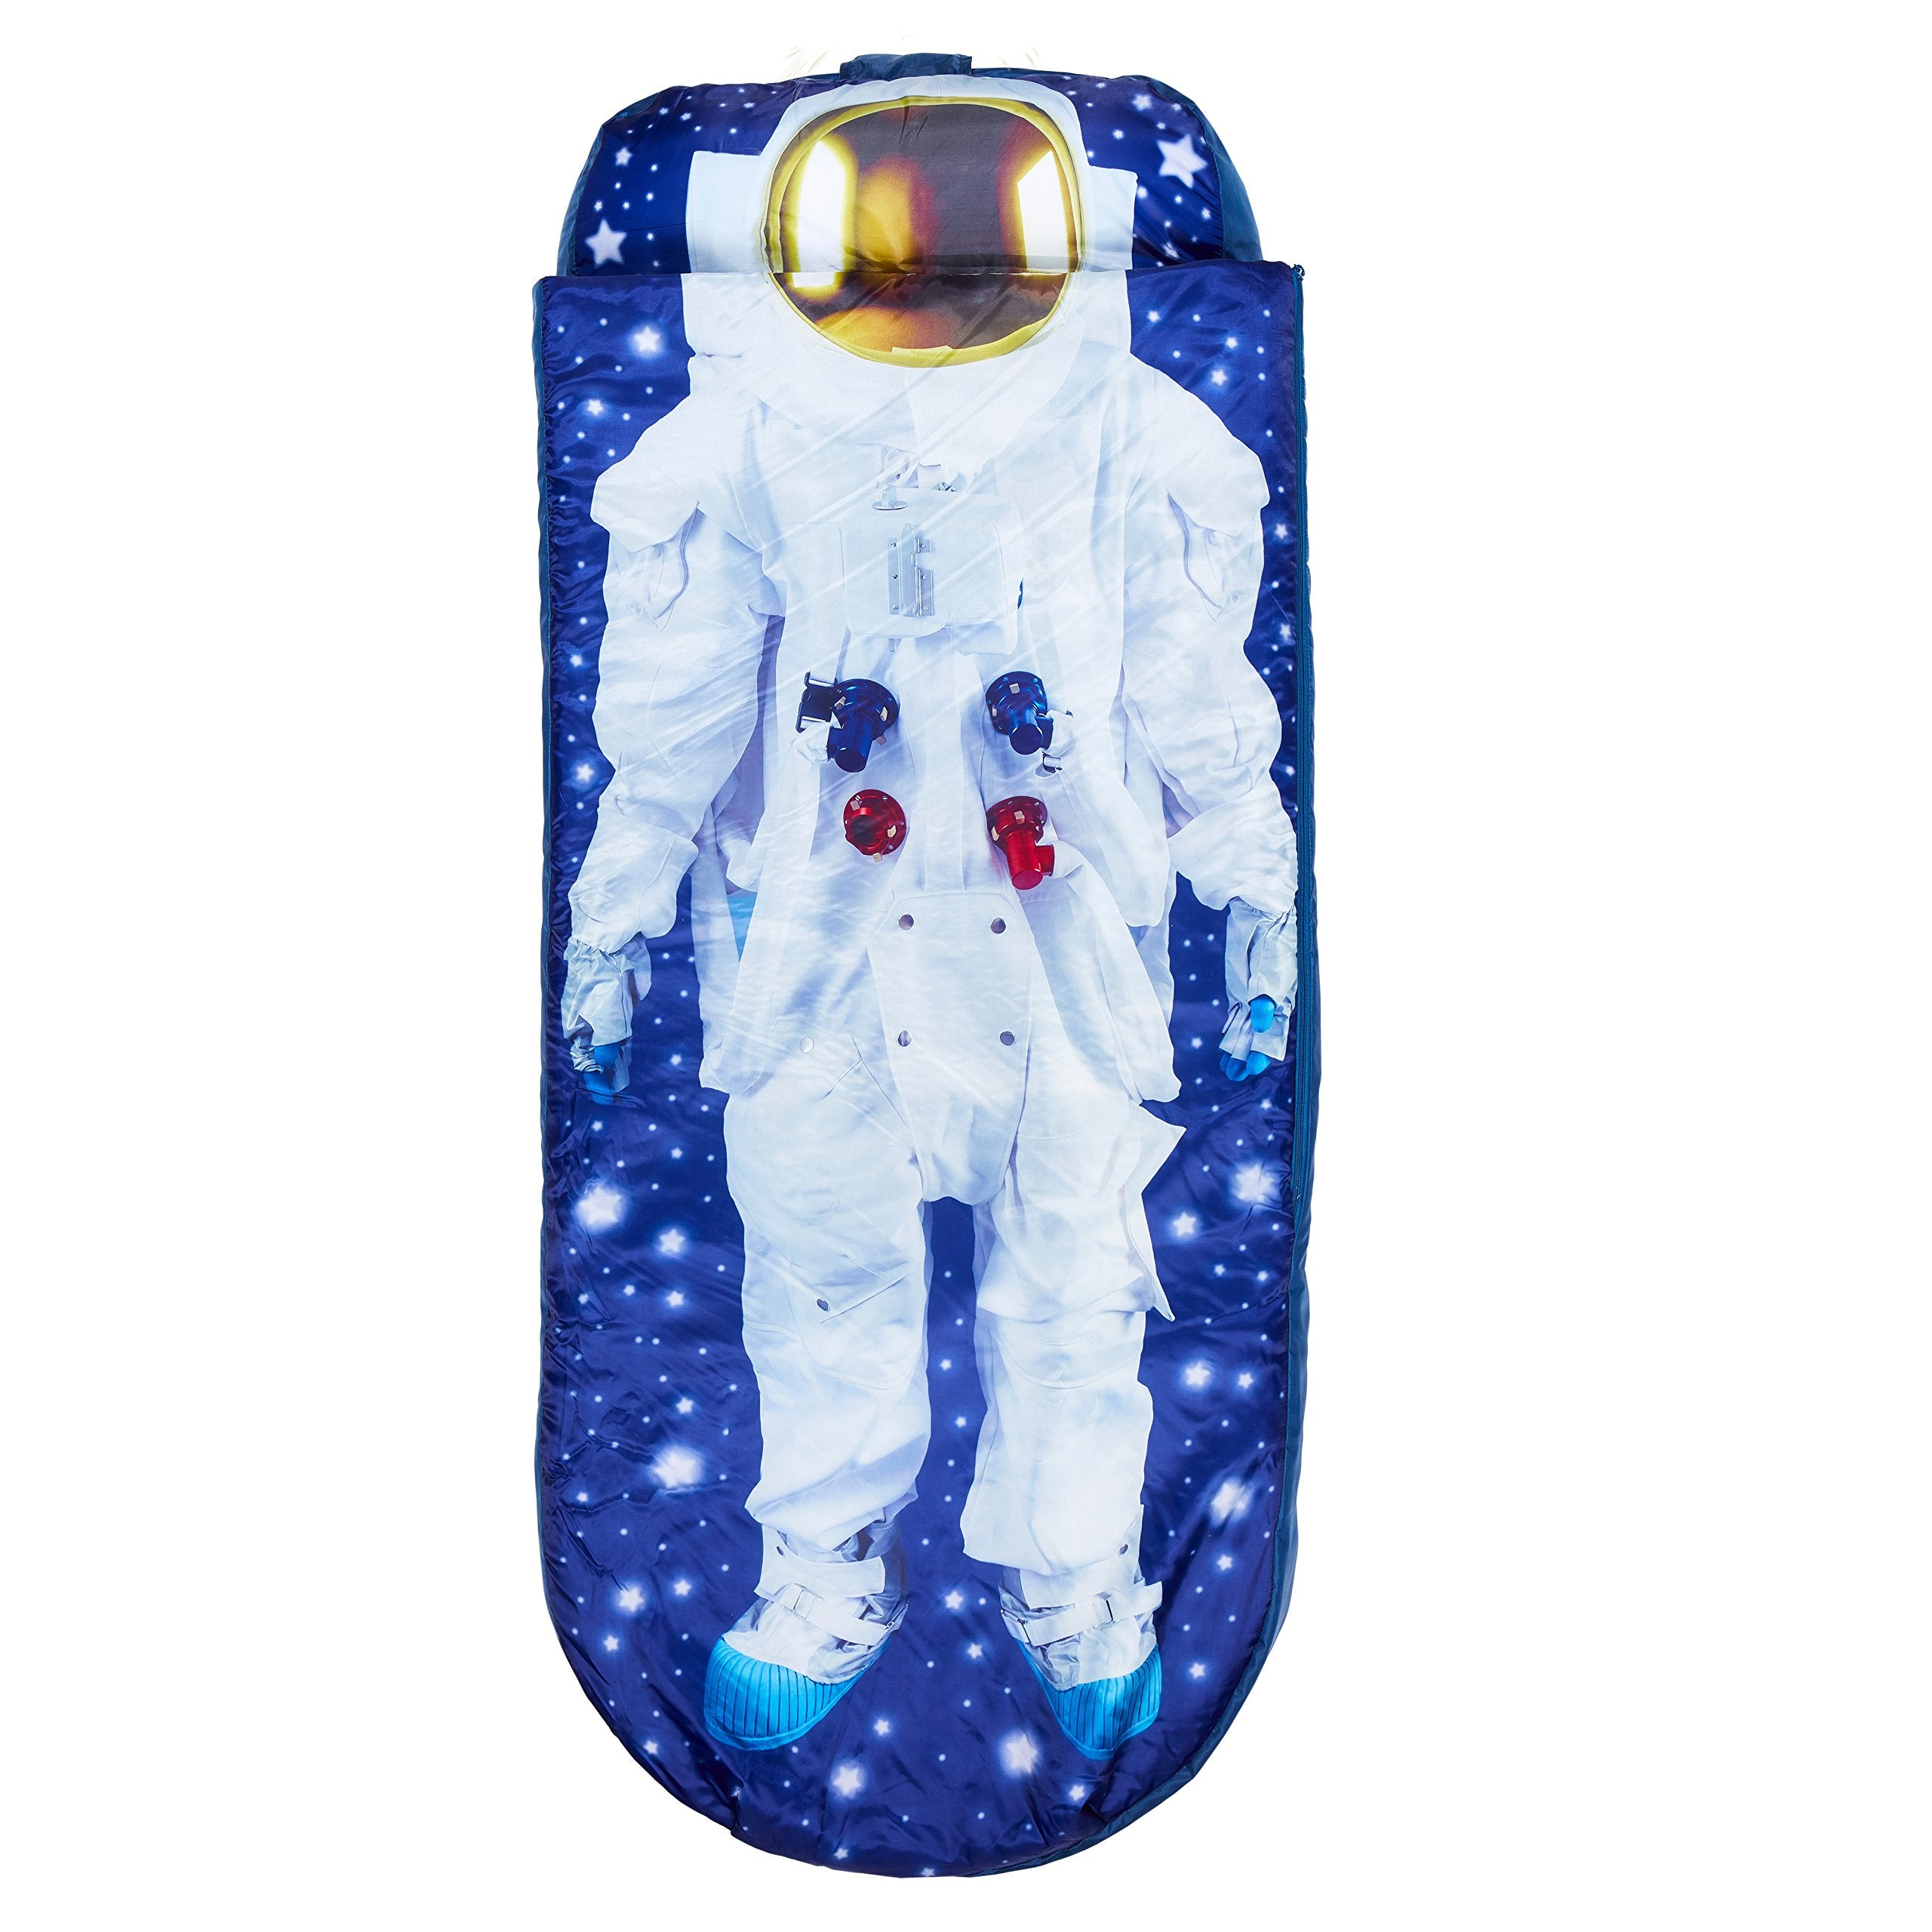 I am Astronaut Junior ReadyBed - Kids Airbed and Sleeping Bag in one - Blue